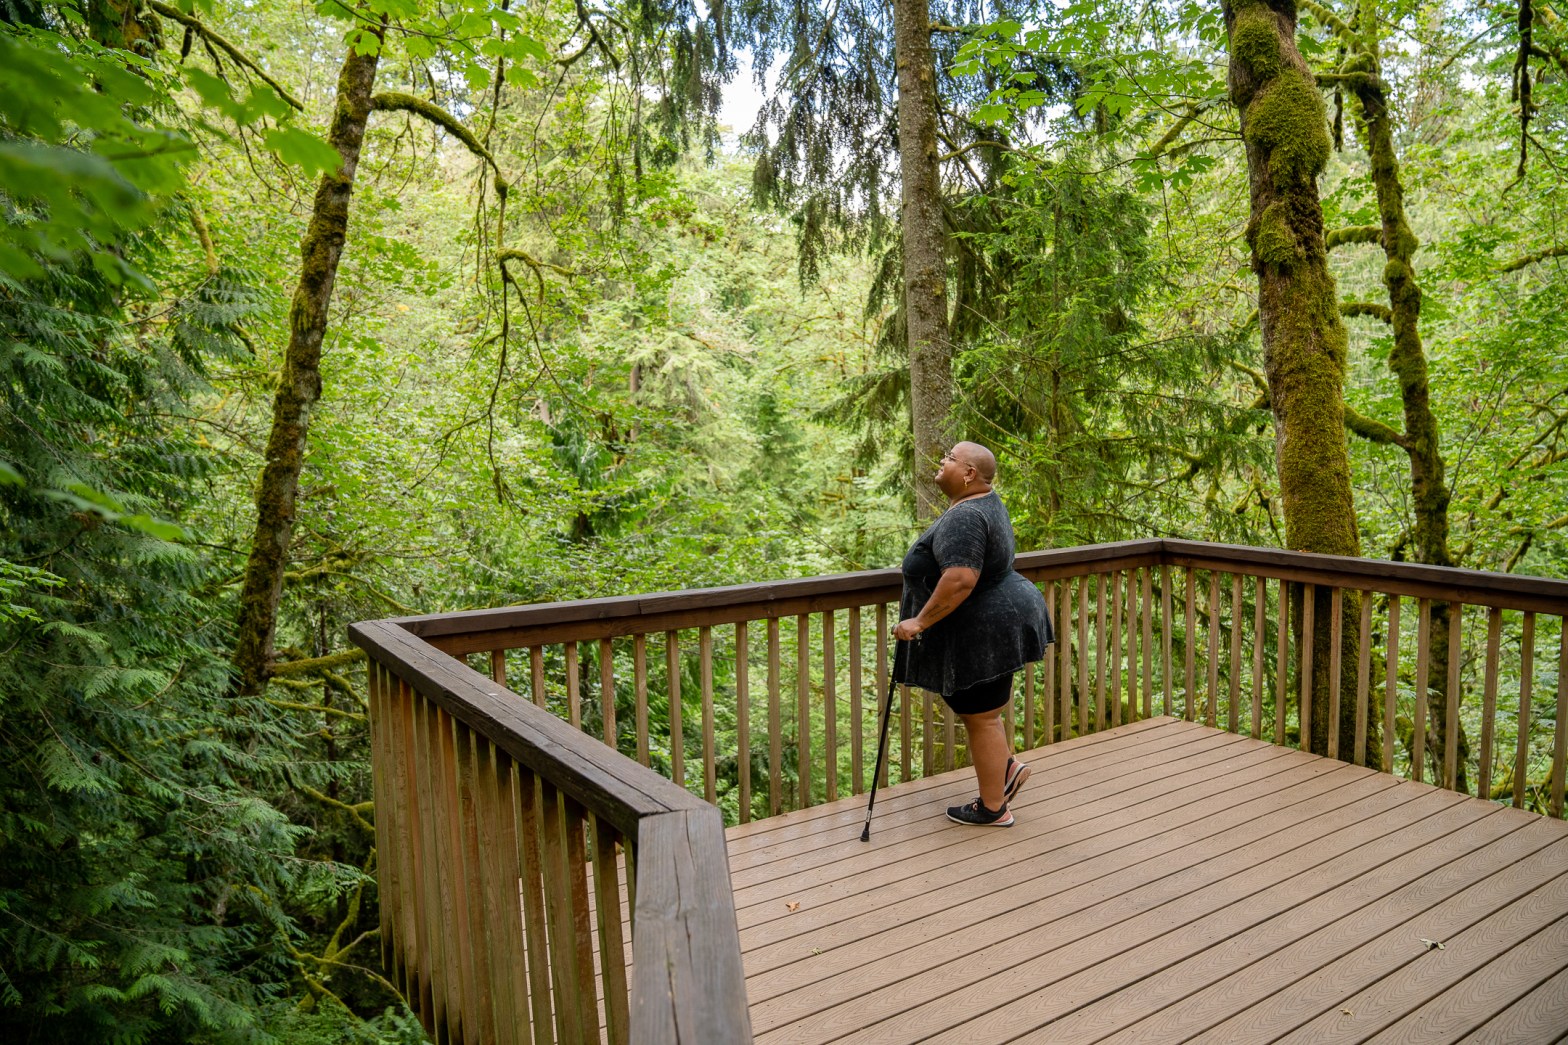 A Black non-binary hiker stands on a wooden deck with their cane, looking out into the surrounding forest. They have a shaved head and wear glasses, a peplum shirt, shorts, and tennis shoes.